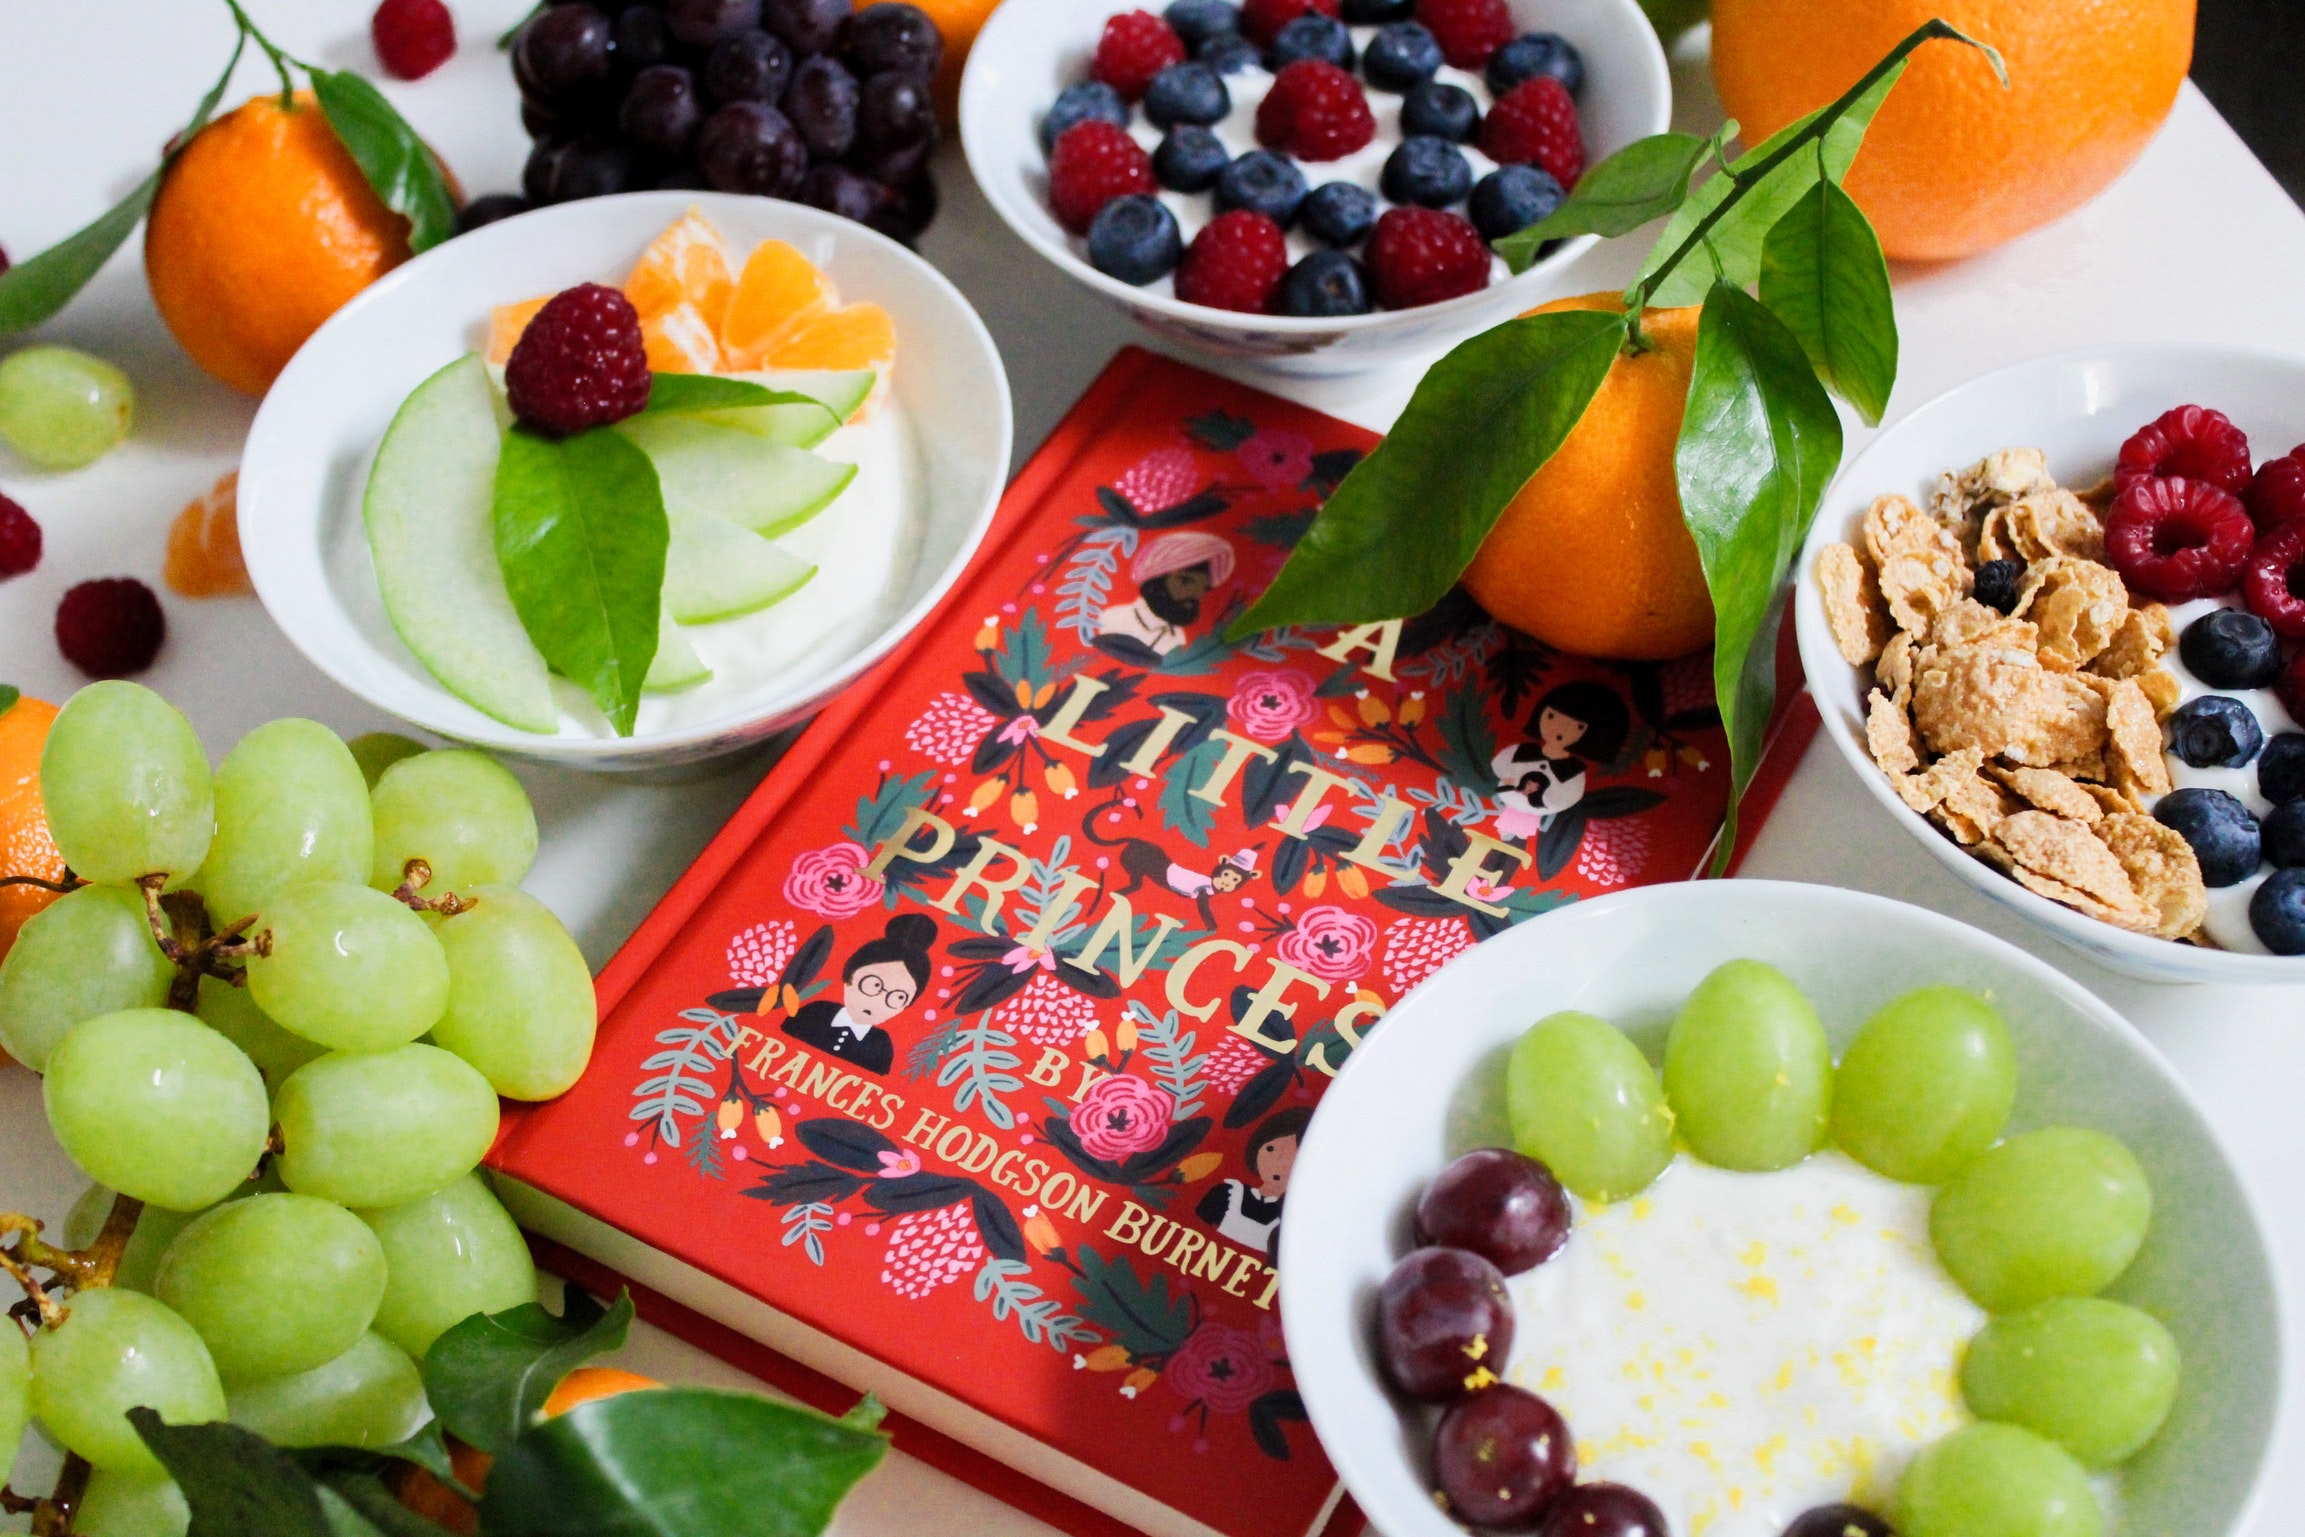 Fruits on plates beside red book photo